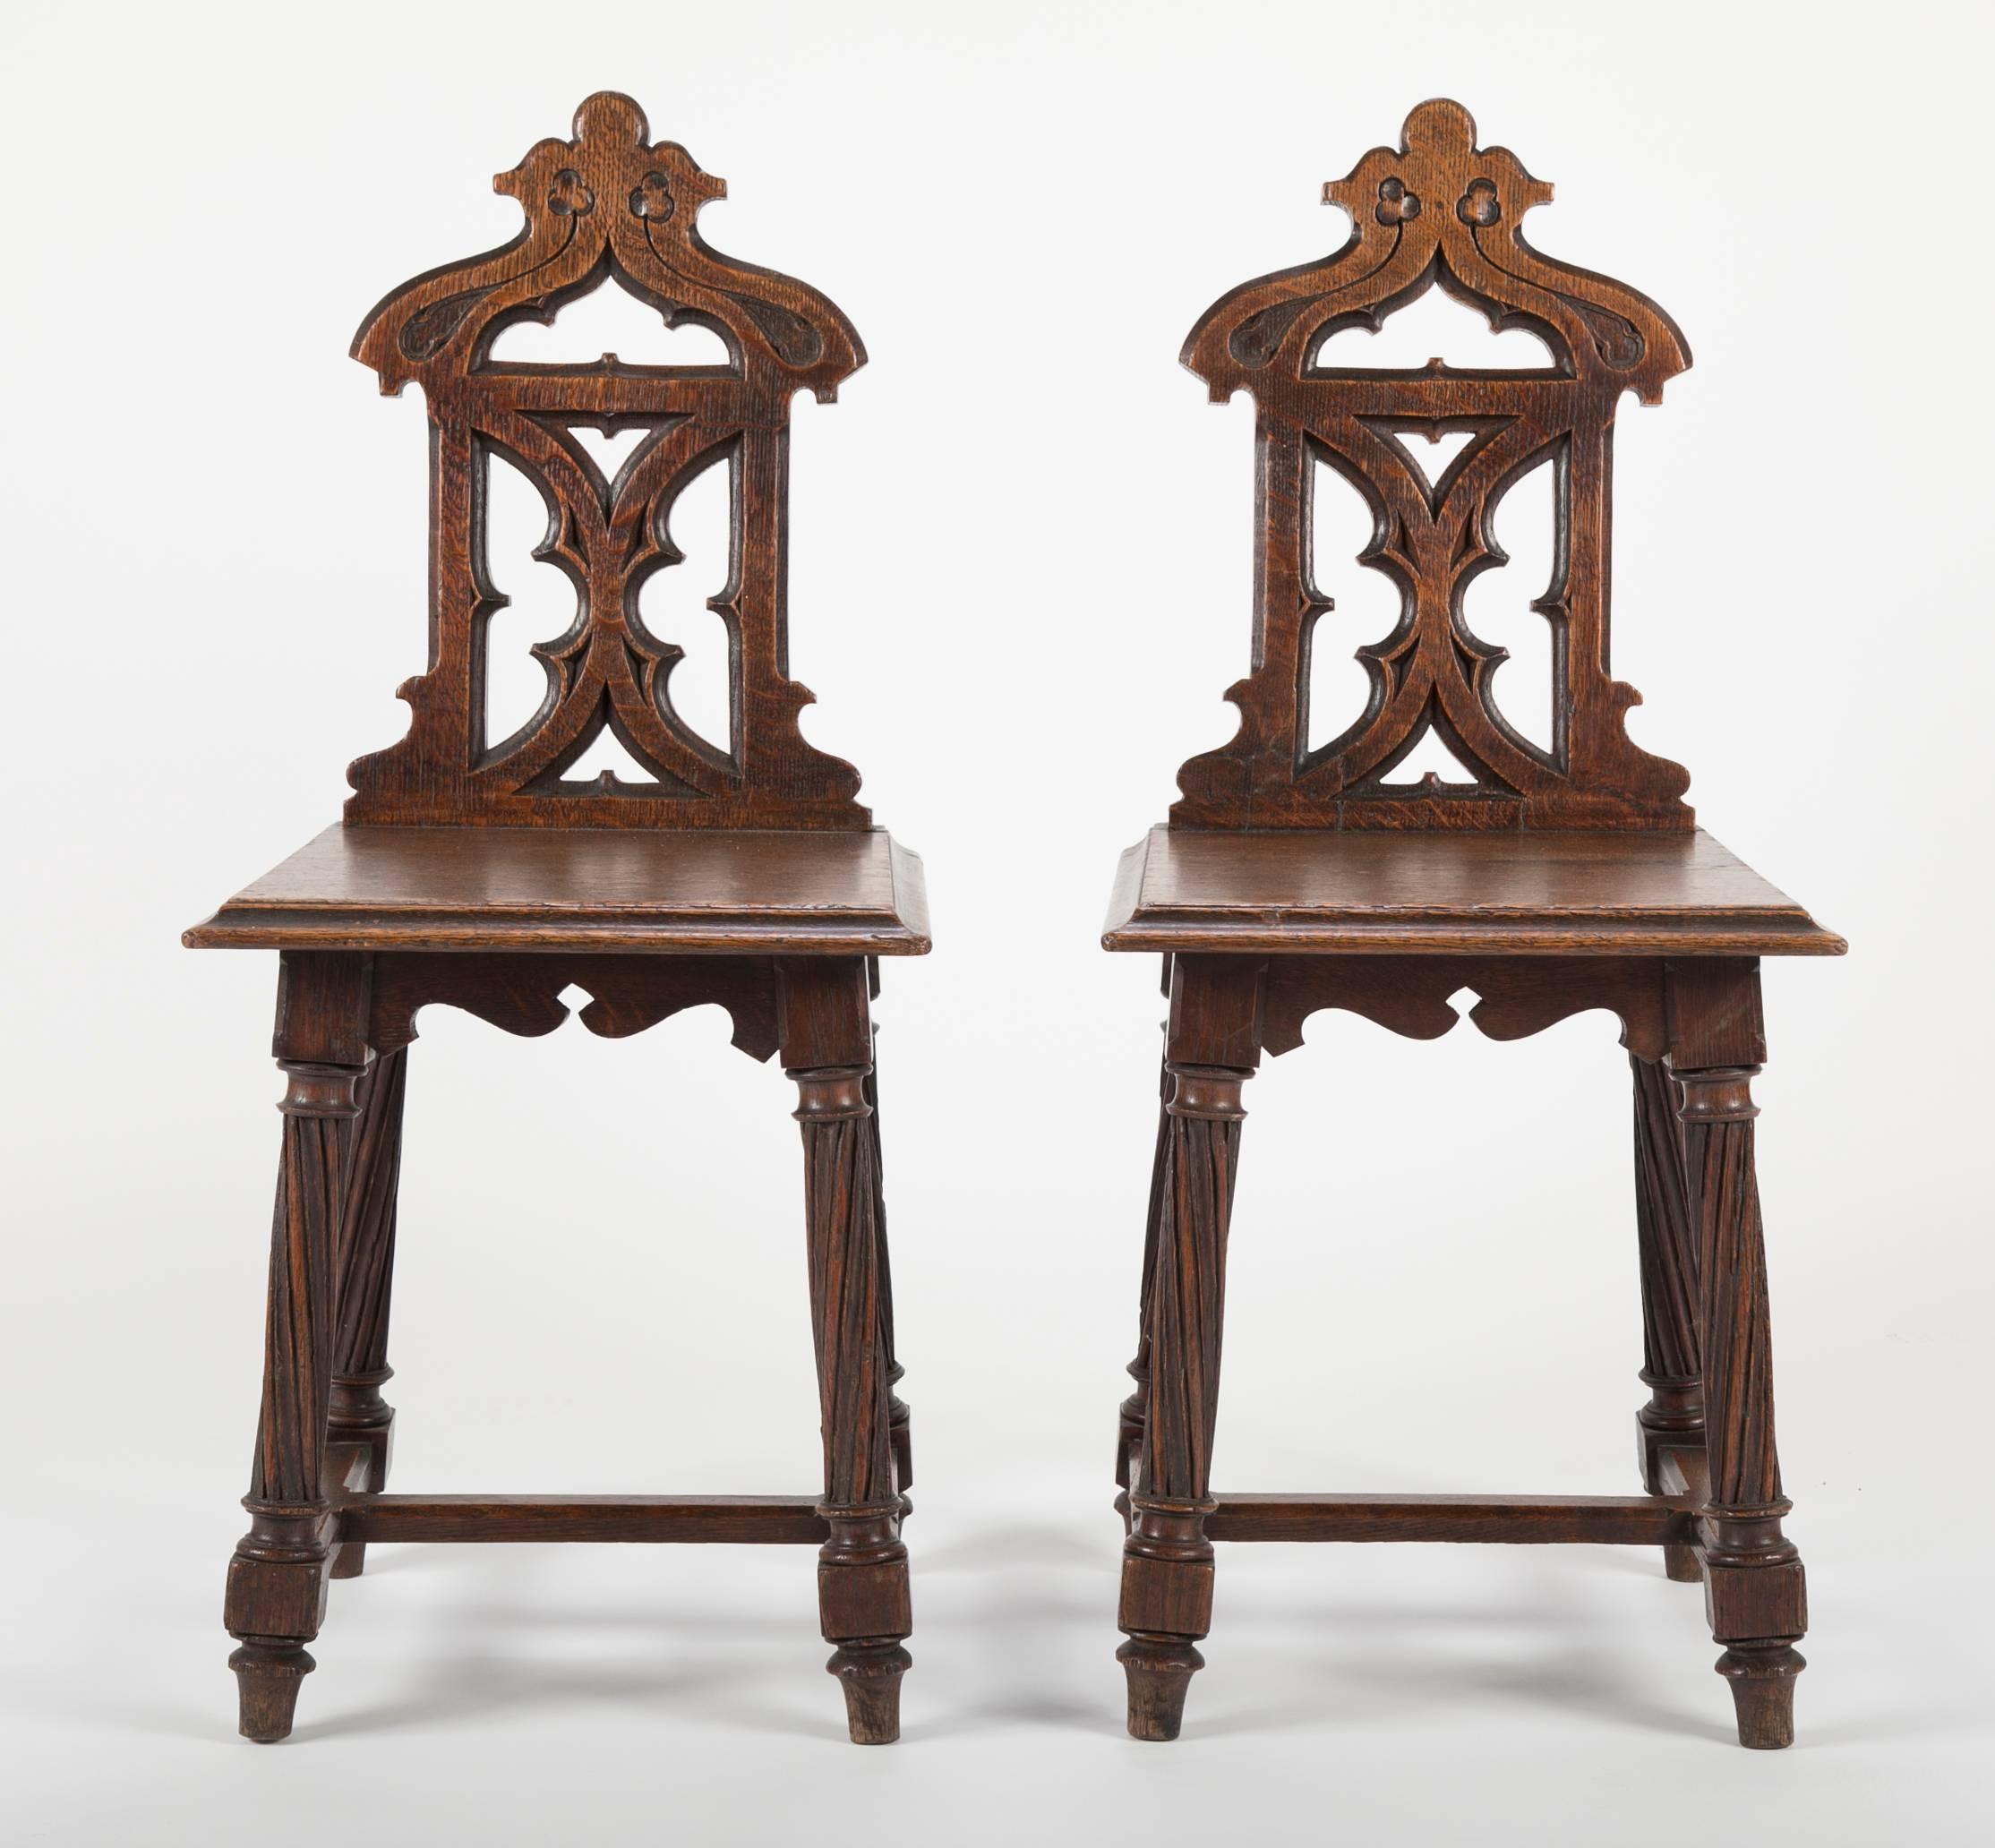 A fine pair of English oak hall chairs with Gothic tracery back splats topped by incised trefoil decoration, supported by four turned legs joined by stretchers with chamfered edges.